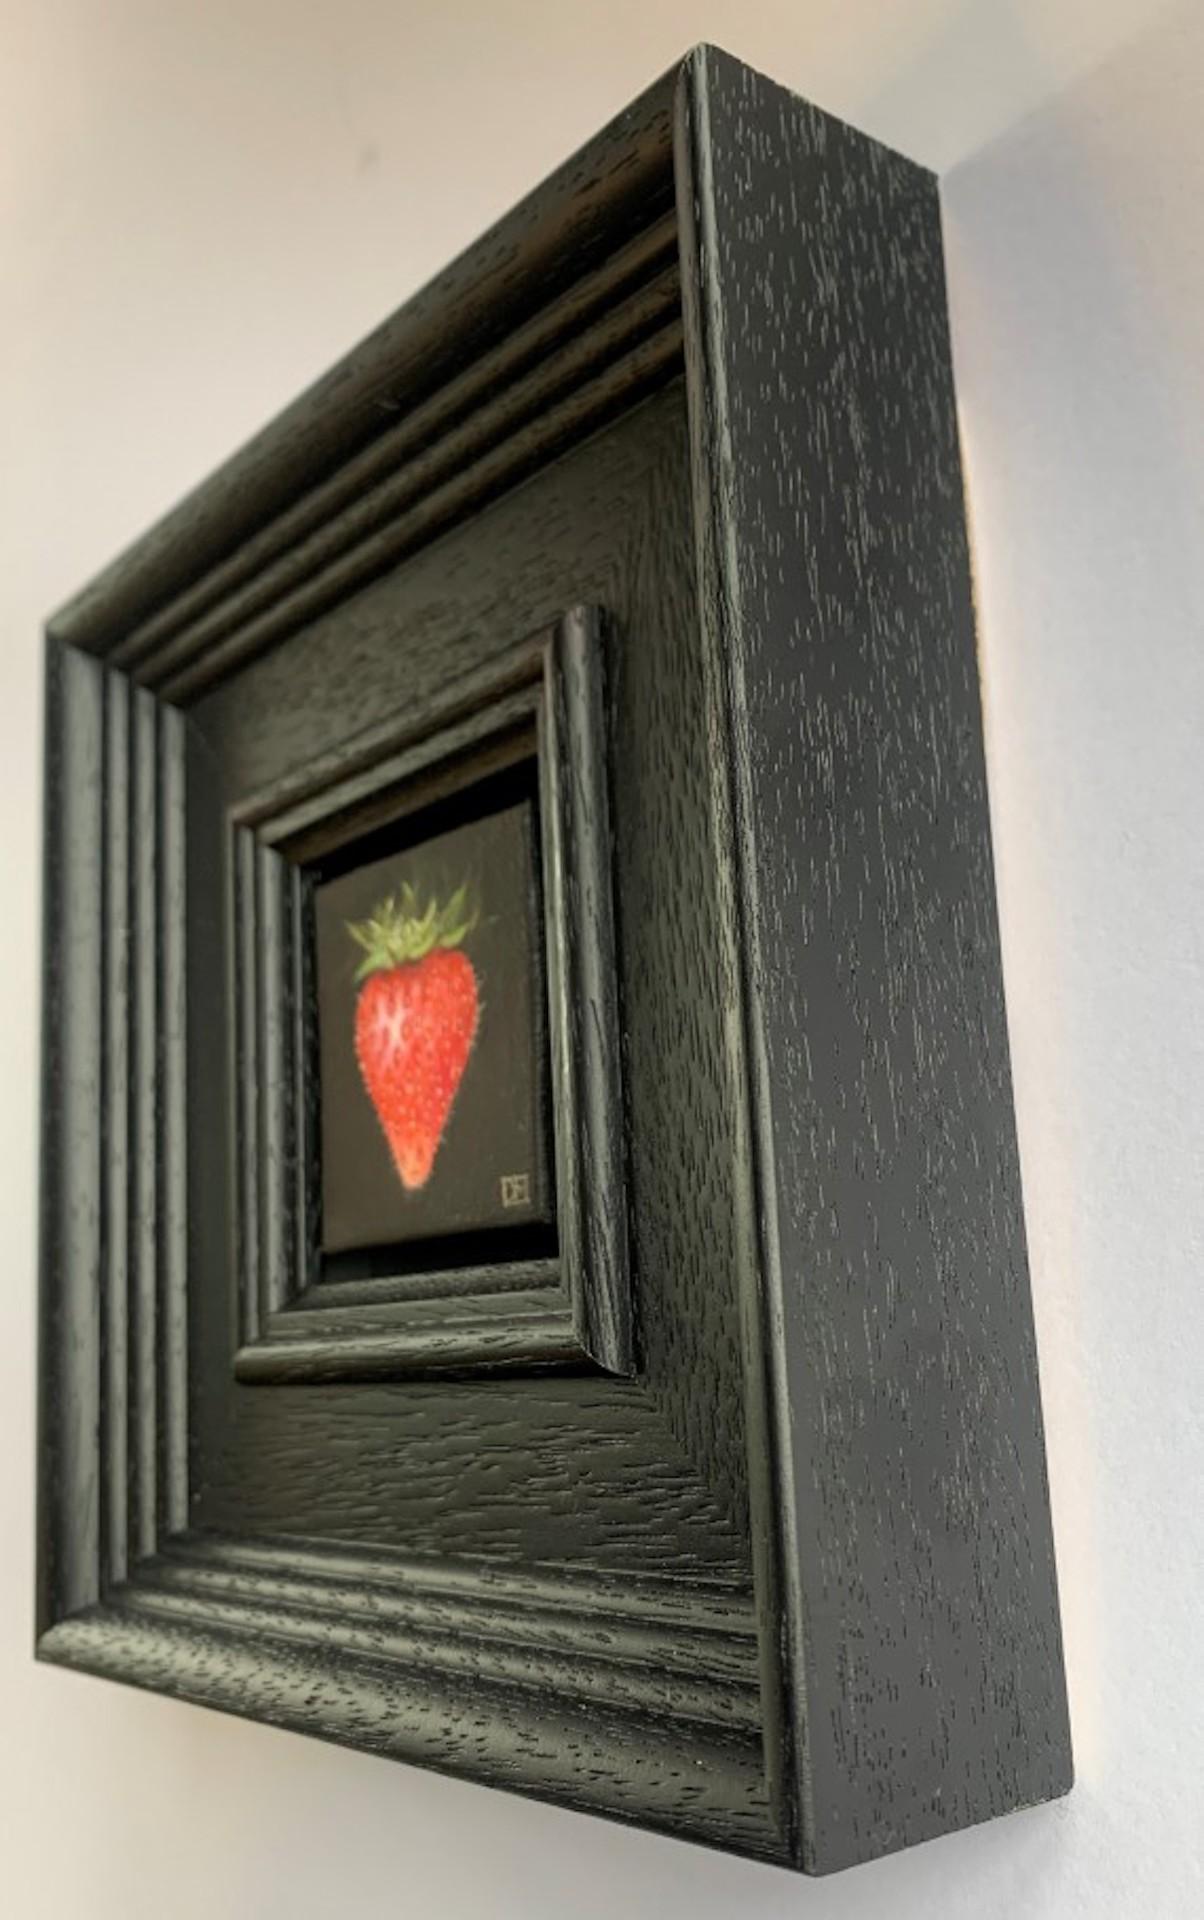 Pocket Strawberry [2021]
Original
Still Life
Oil On Canvas
Image size: H:5 cm x W:5 cm
Frame Size: H:16.5 cm x W:16.5 cm x D:3.5cm
Sold Framed
Please note that insitu images are purely an indication of how a piece may look

Pocket Strawberry is an